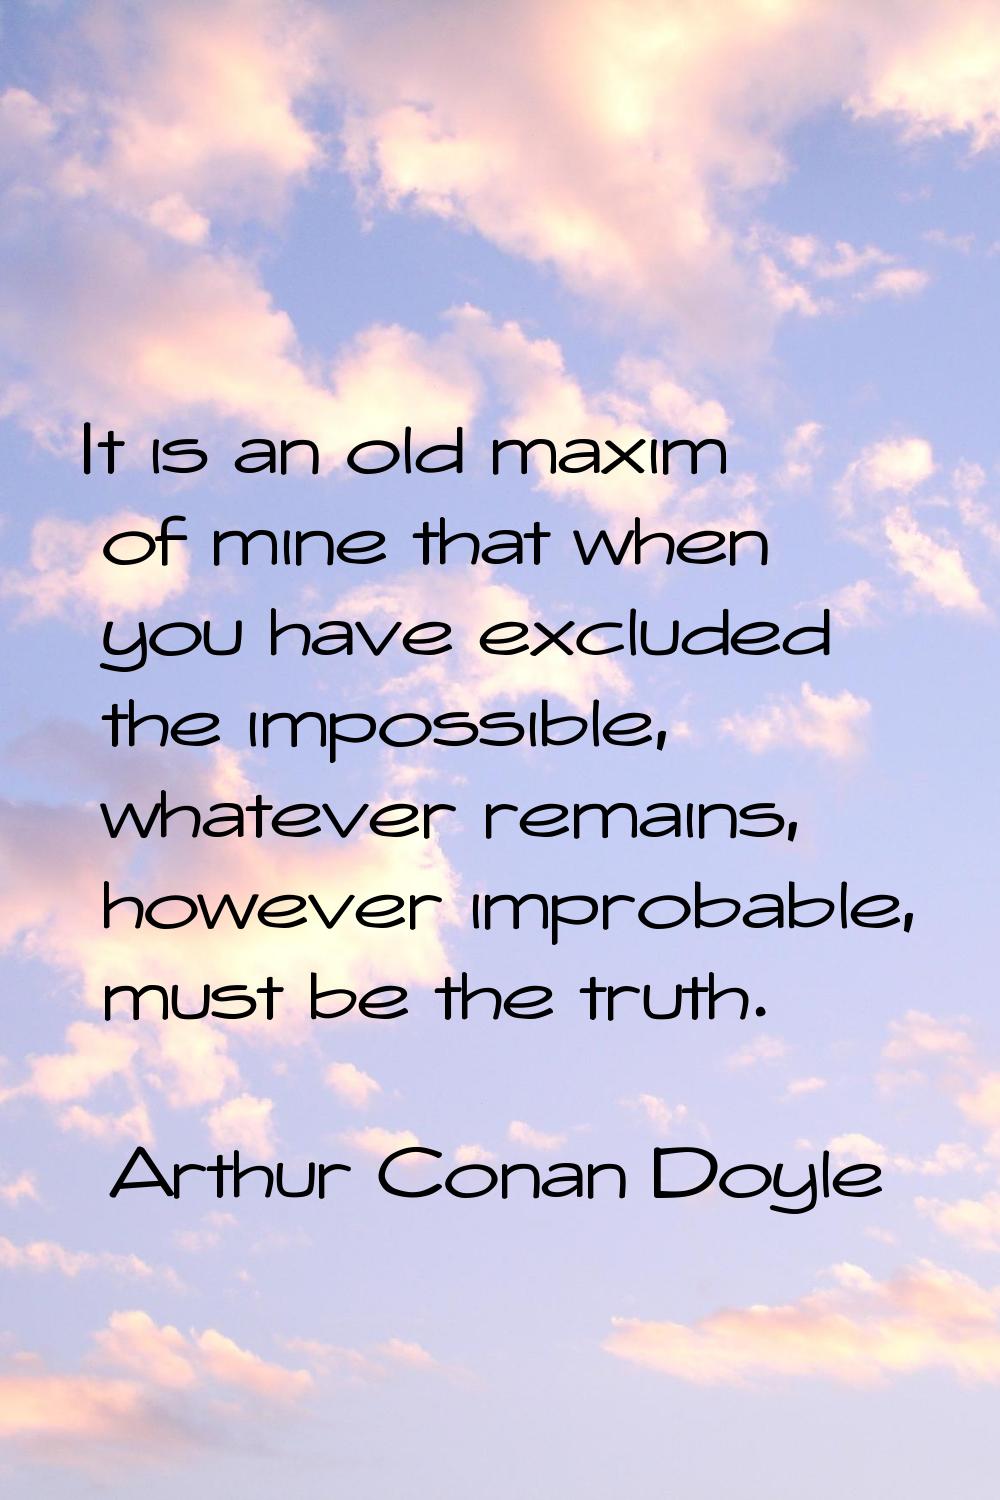 It is an old maxim of mine that when you have excluded the impossible, whatever remains, however im